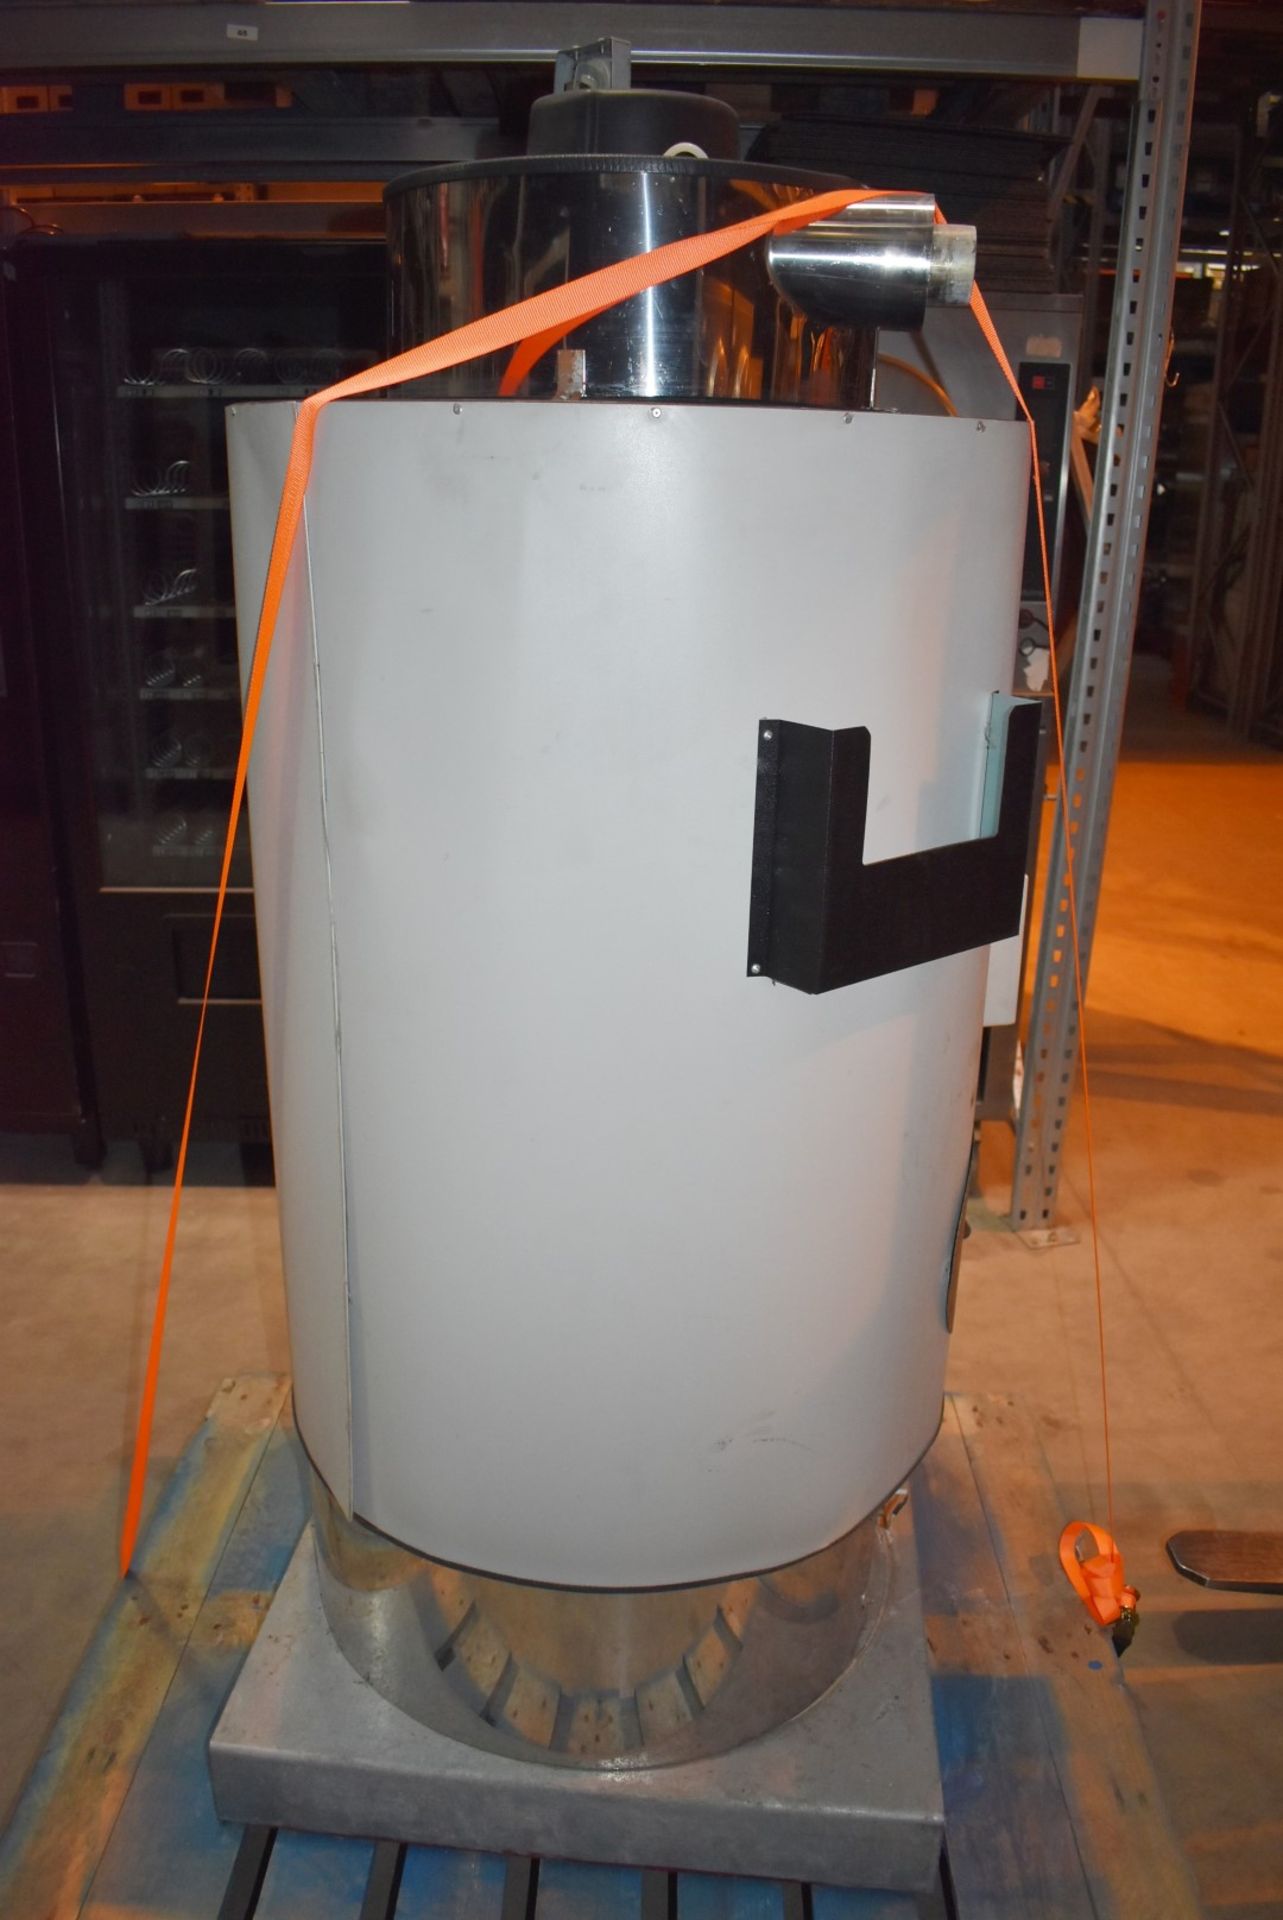 1 x Lochinvar High Efficiency Gas Fired 220L Storage Water Heater - Model LBF-220 - Ref: WH2-145 H5D - Image 7 of 14